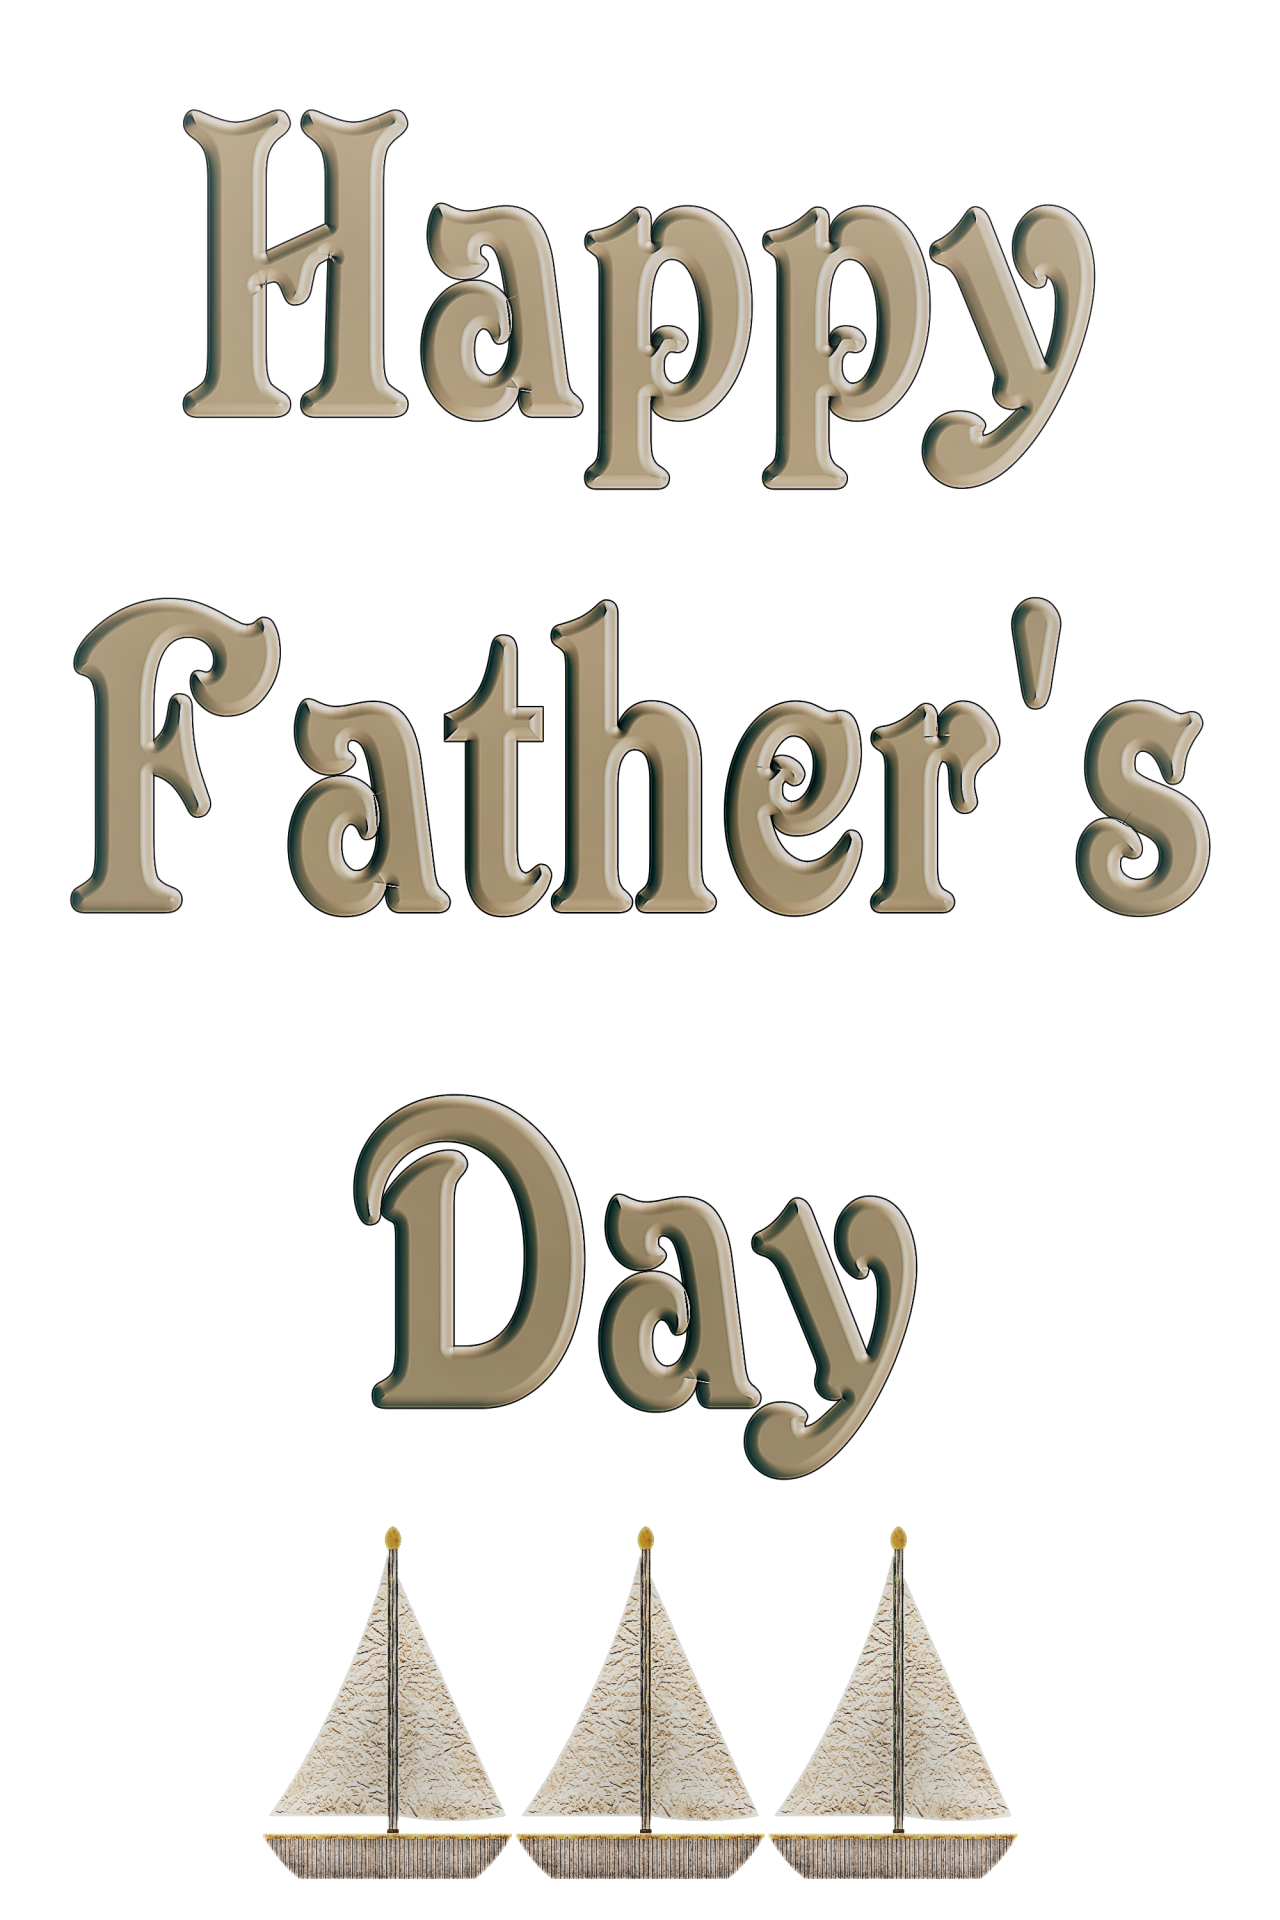 happy-father-s-day-2019-11b-free-stock-photo-public-domain-pictures